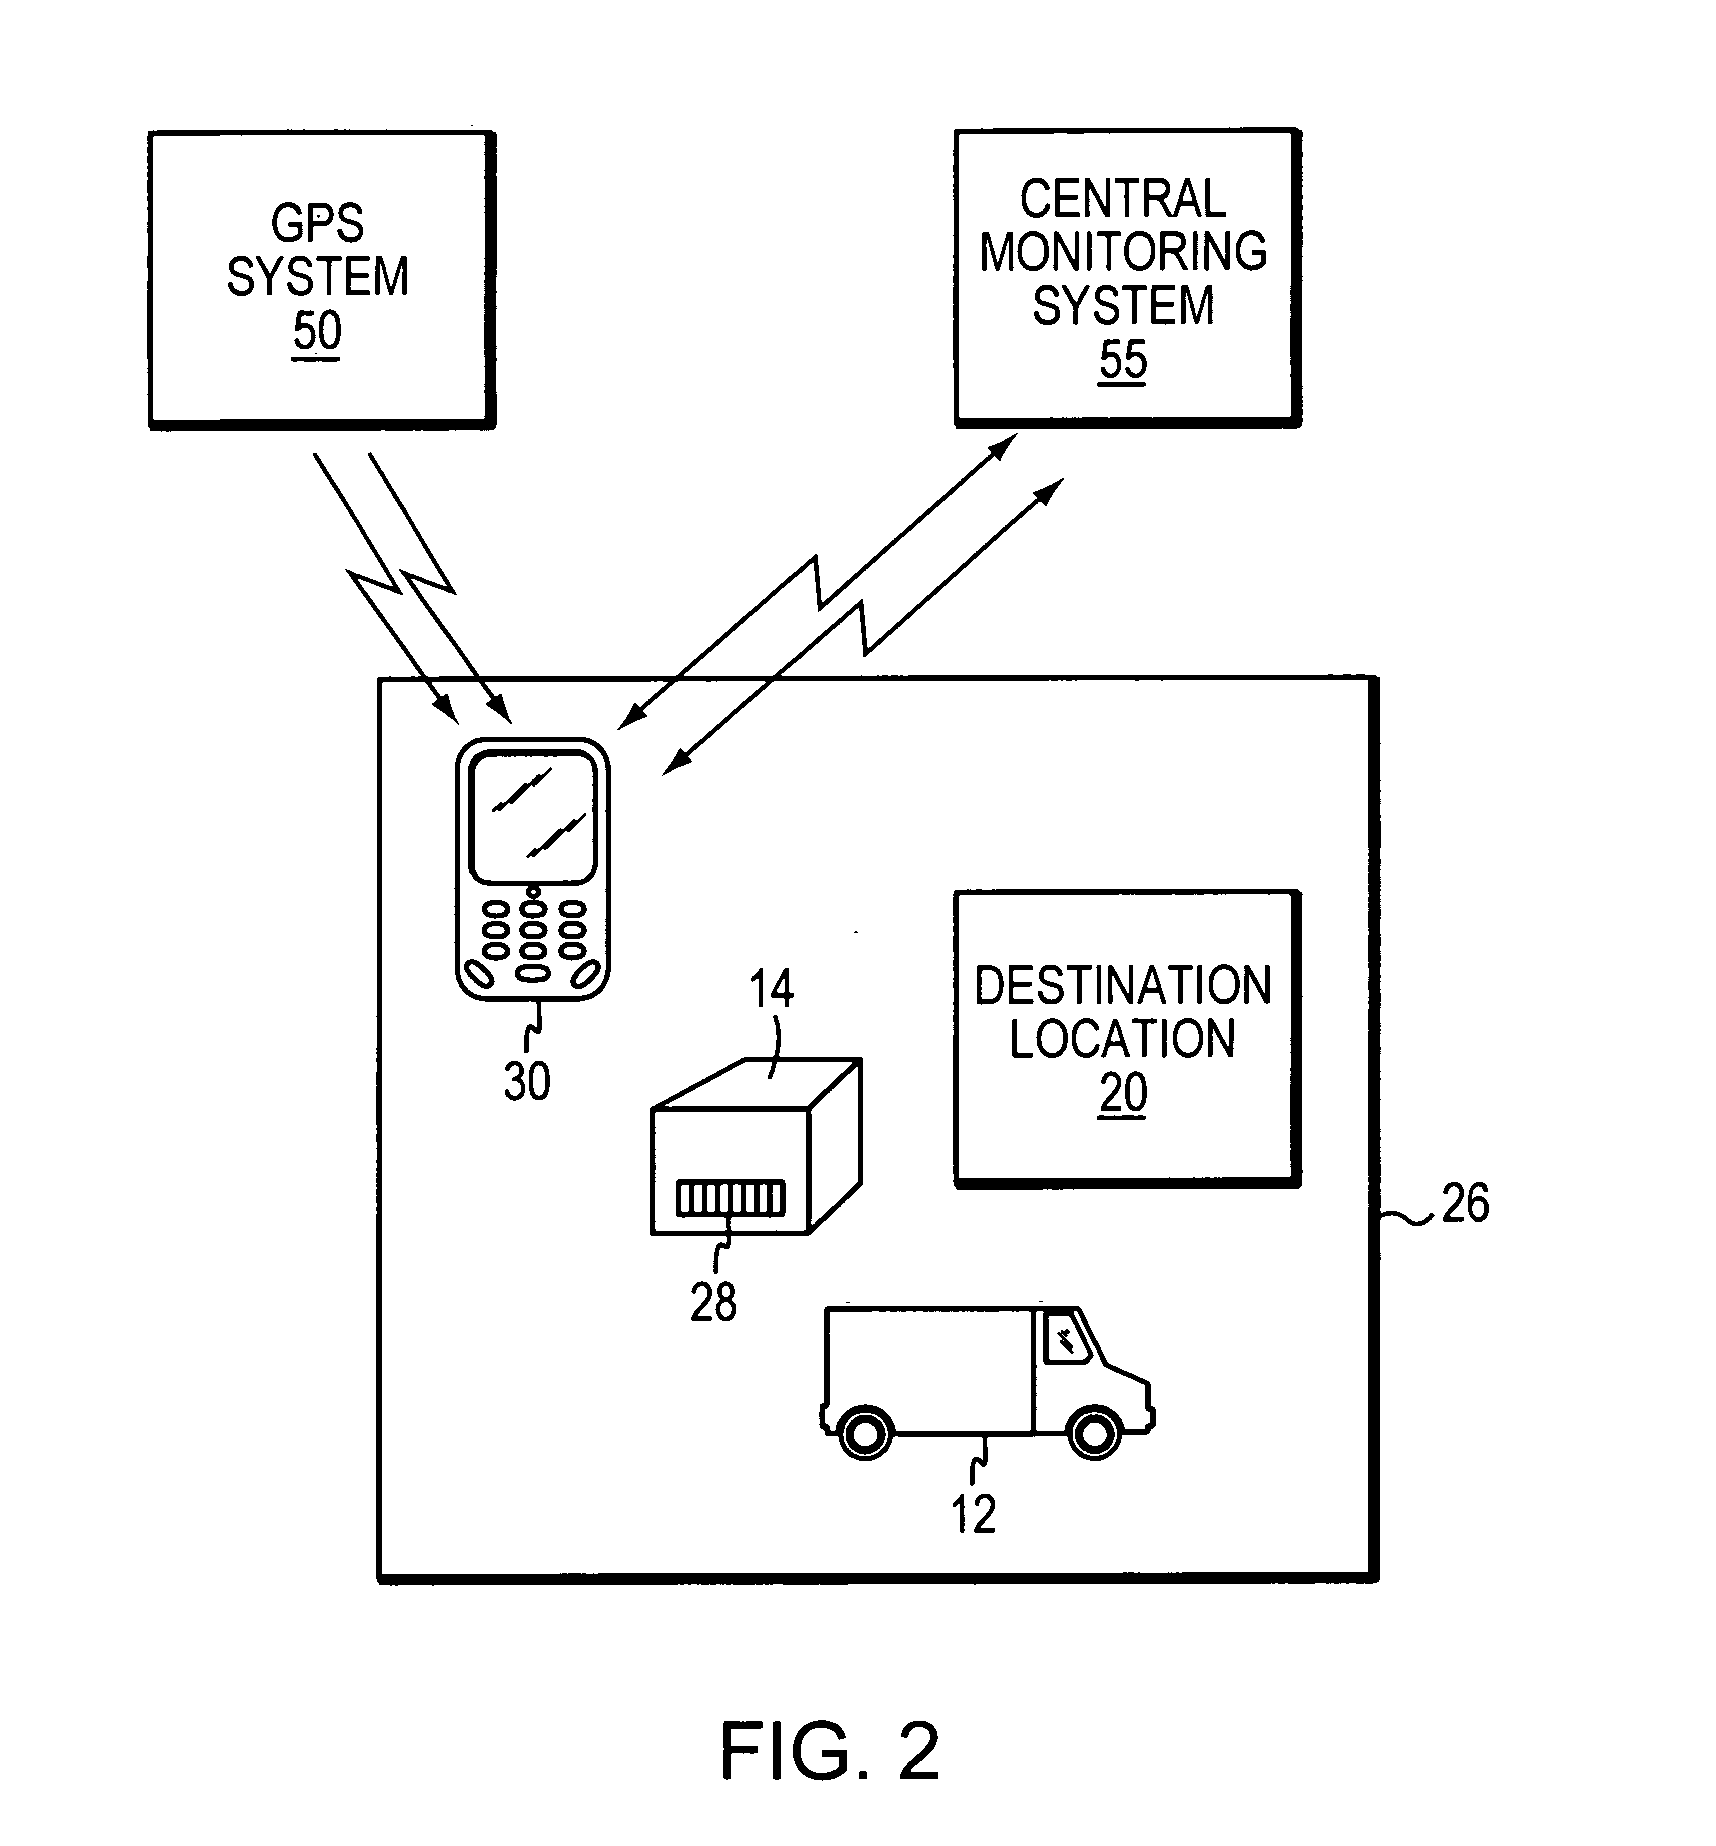 Item-based monitoring systems and methods